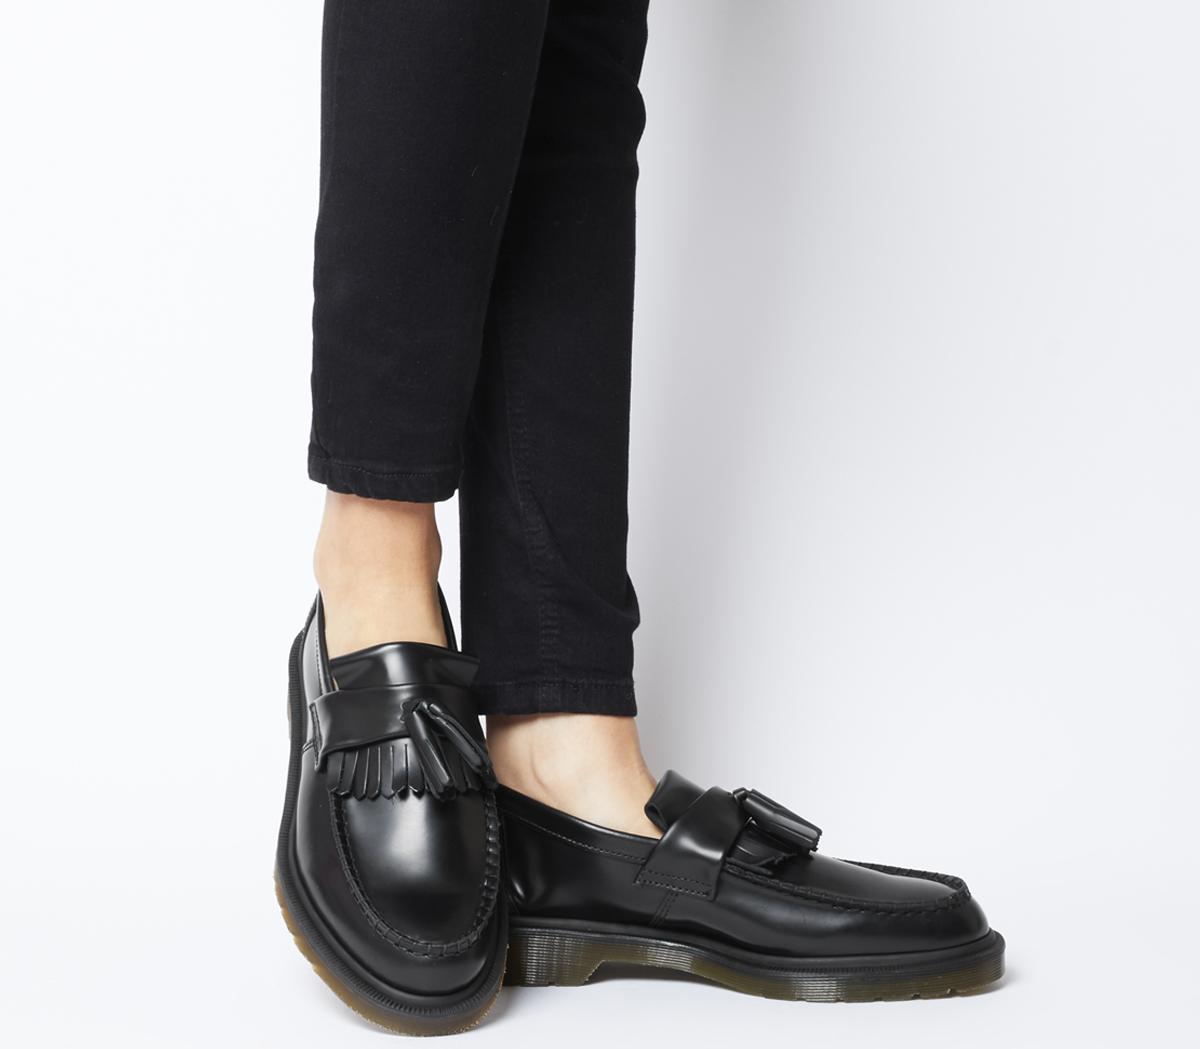 Dr. Martens Adrian Loafers Black Smooth - Flats